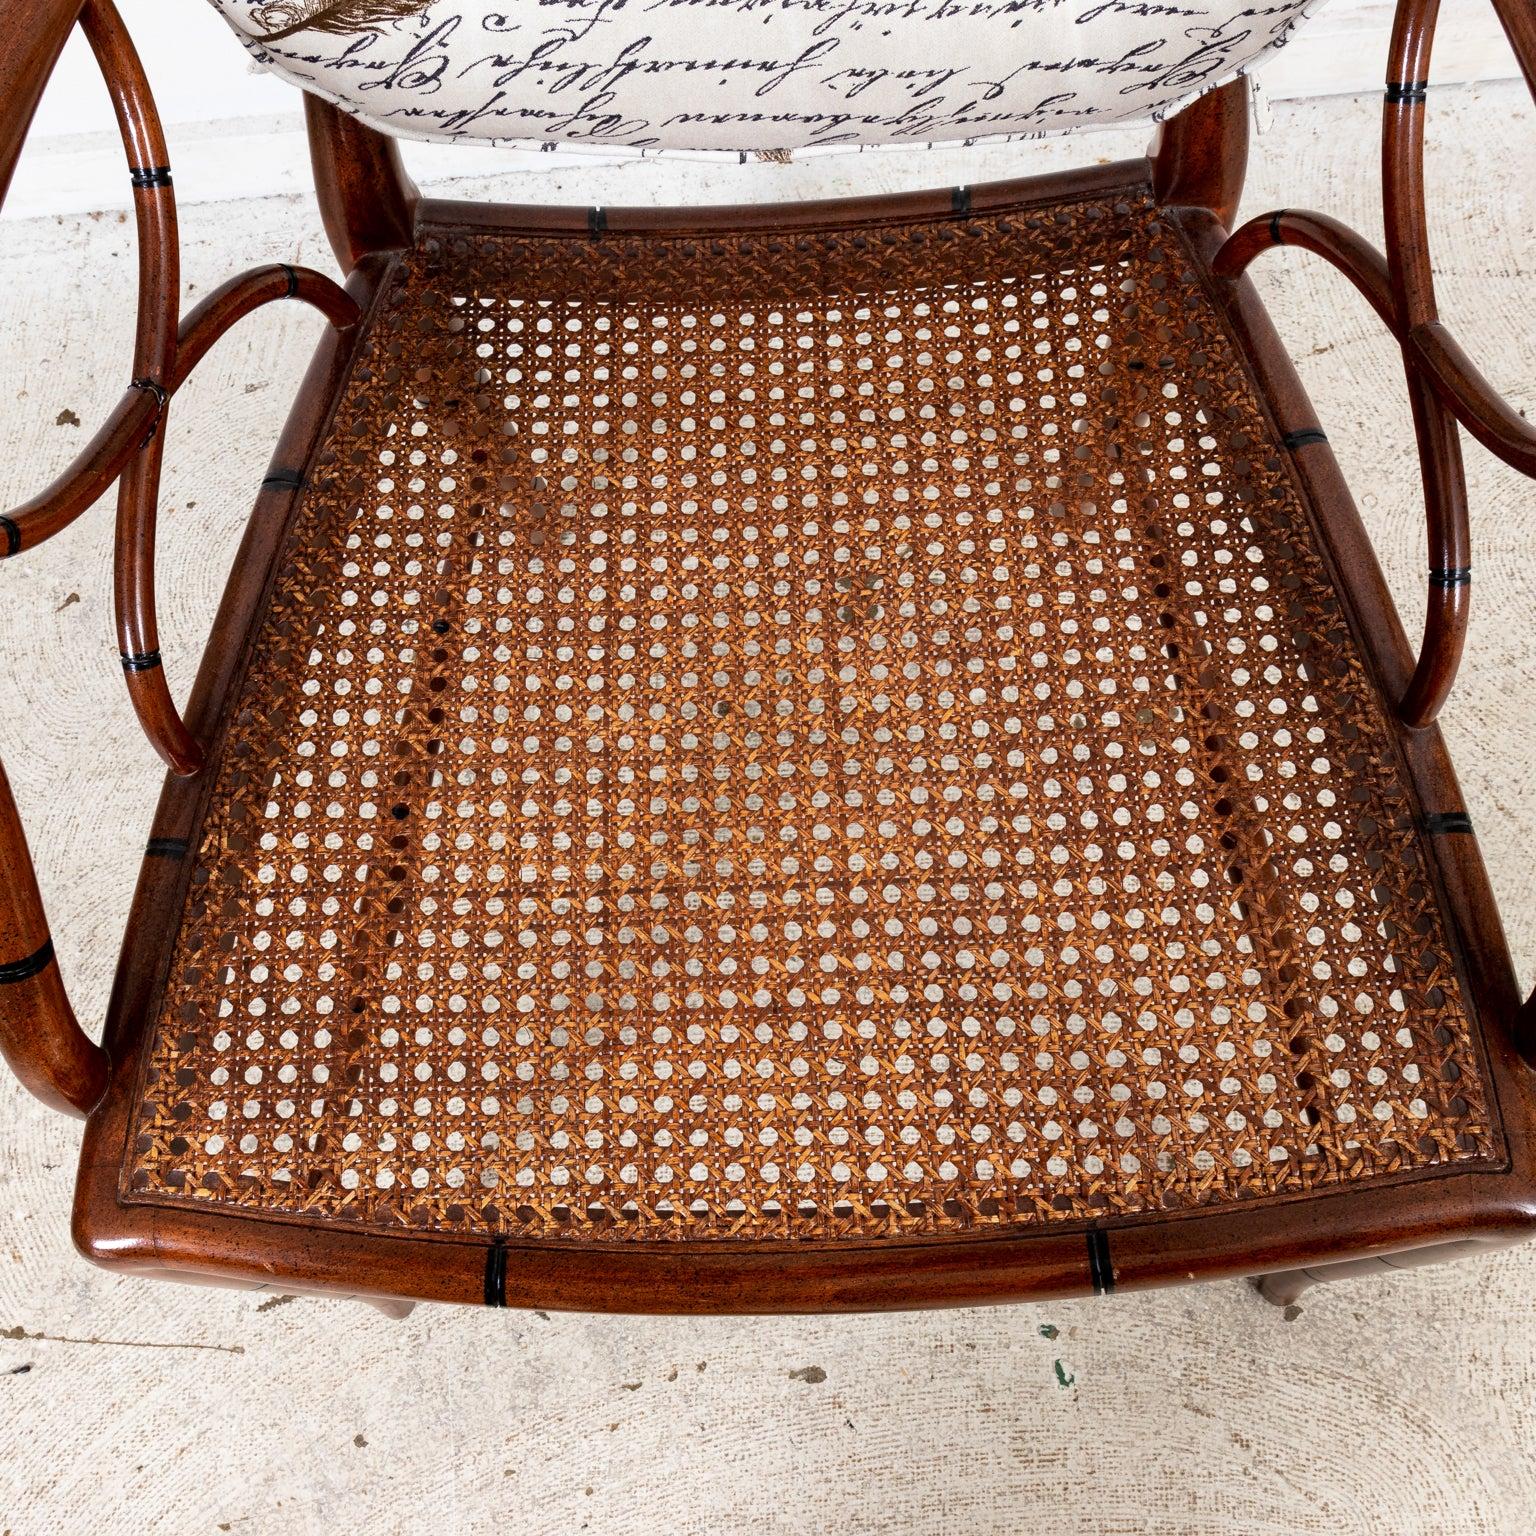 20th Century Caned Seat Armchair with Cushion For Sale